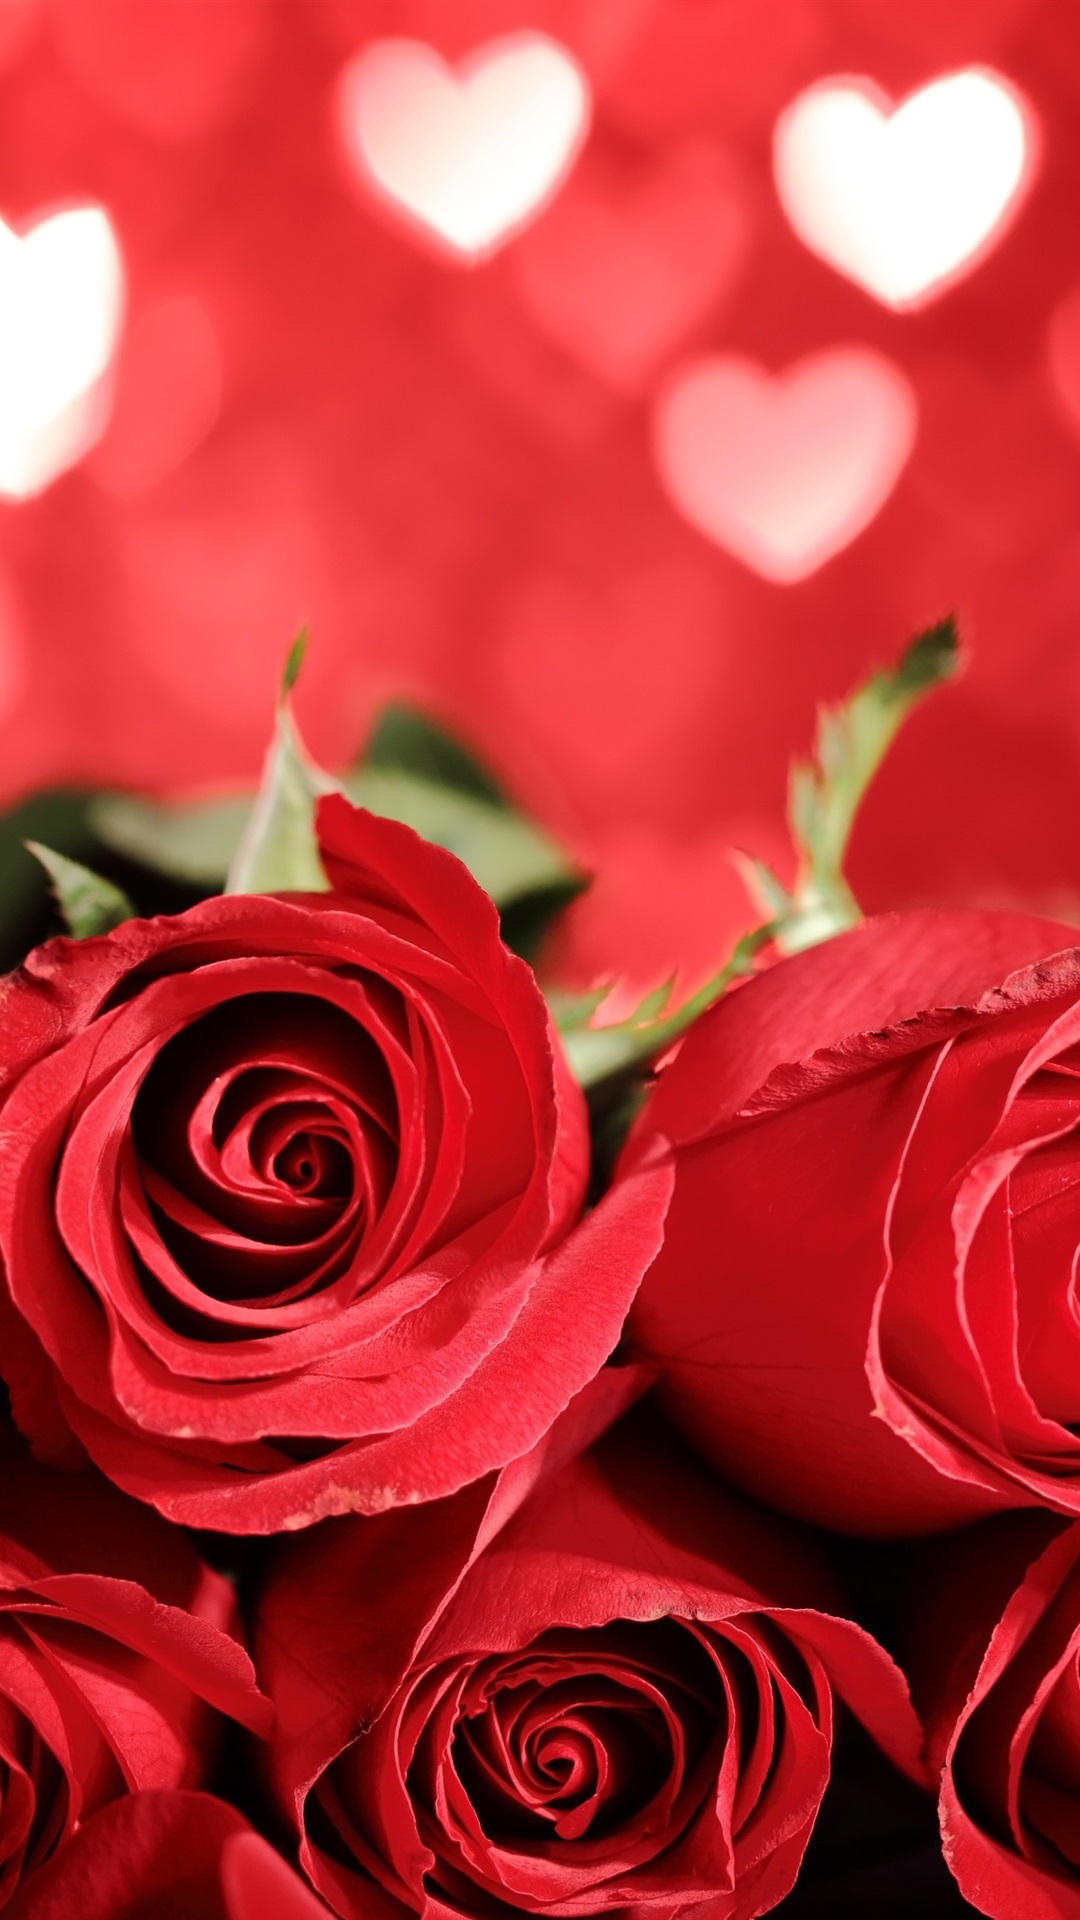 Iphone Wallpaper Beautiful Red Roses, Love Heart Background - عکس تصویر زمینه گل - HD Wallpaper 